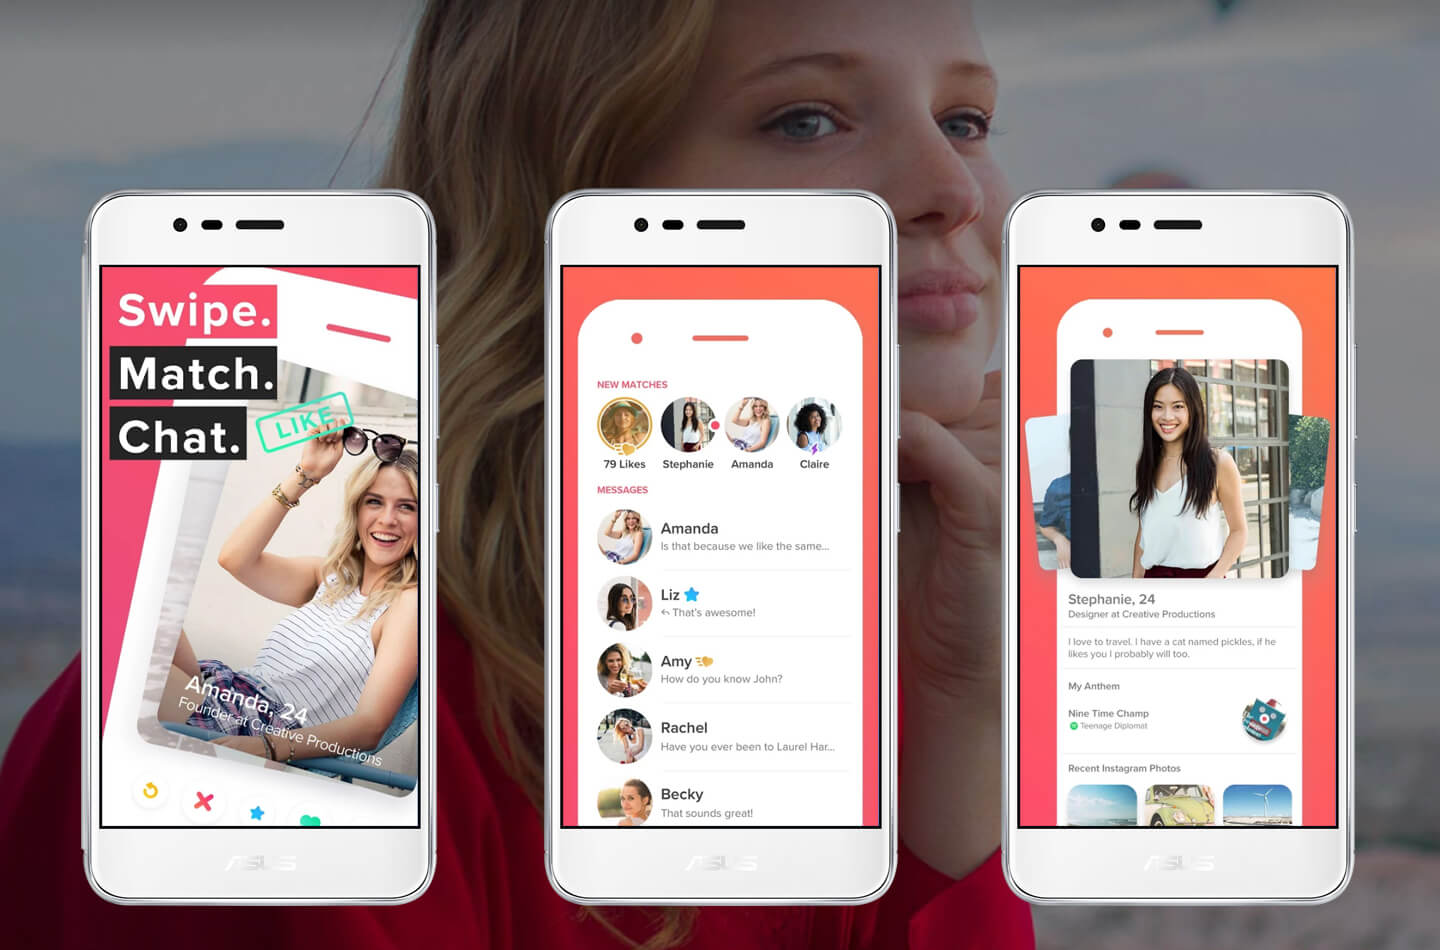 What is the 1 dating app?